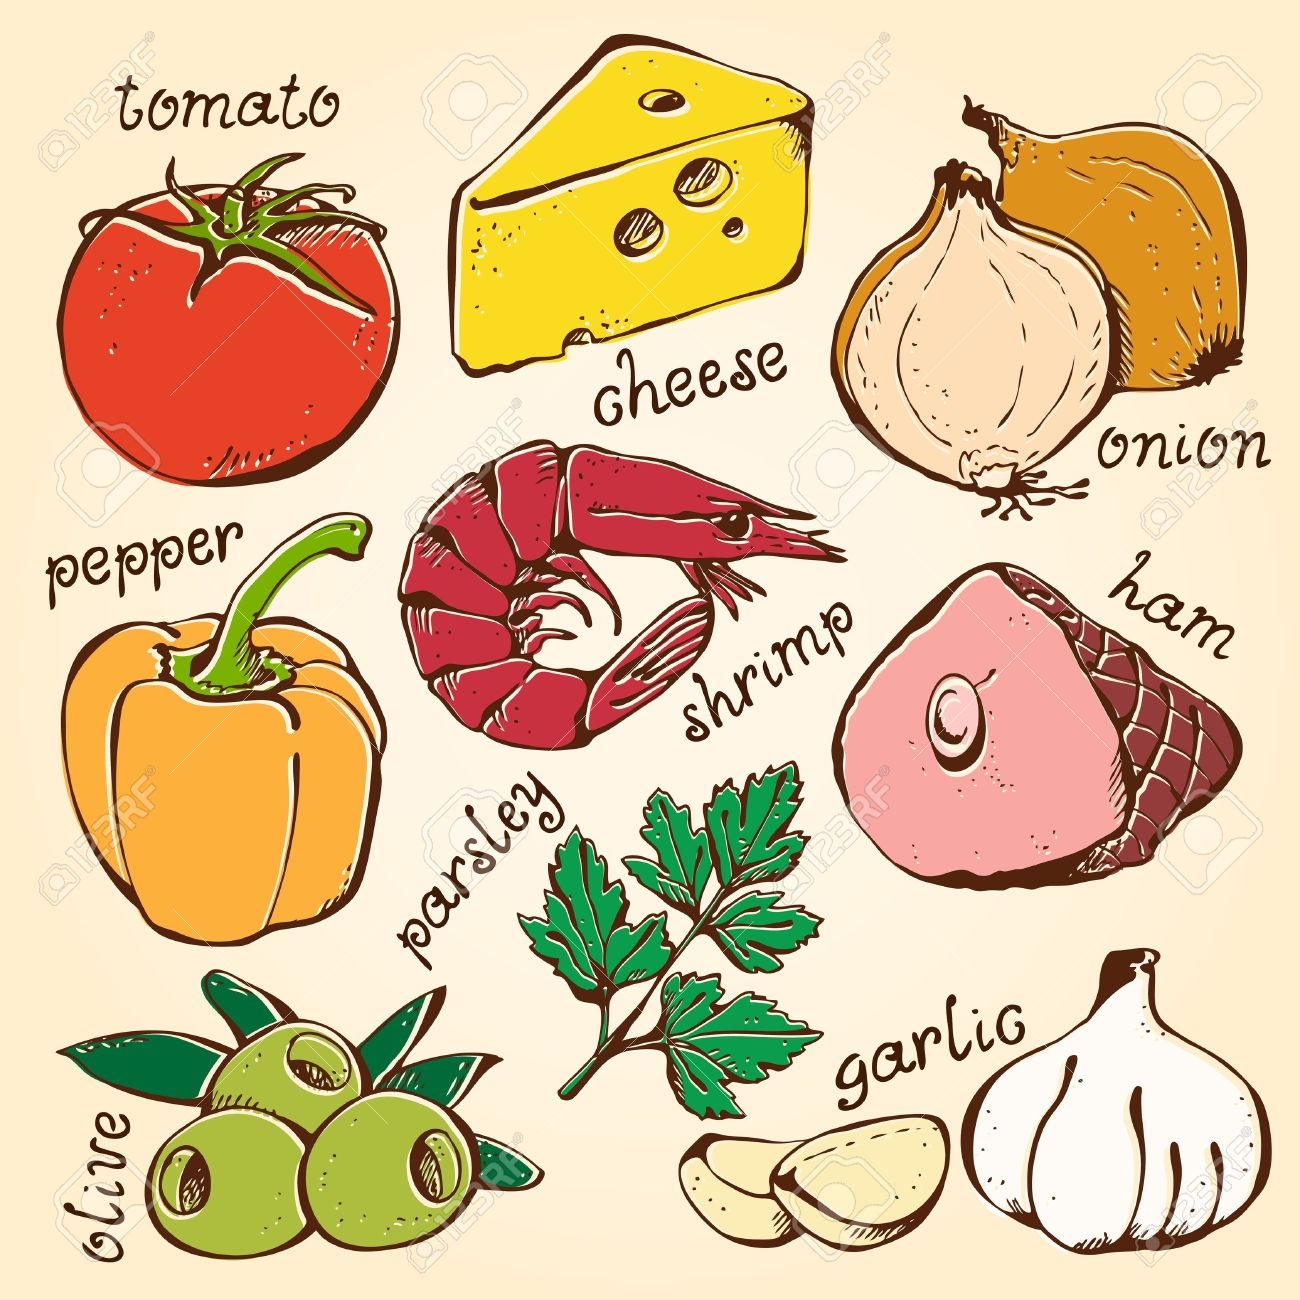 pizza toppings clipart - photo #25